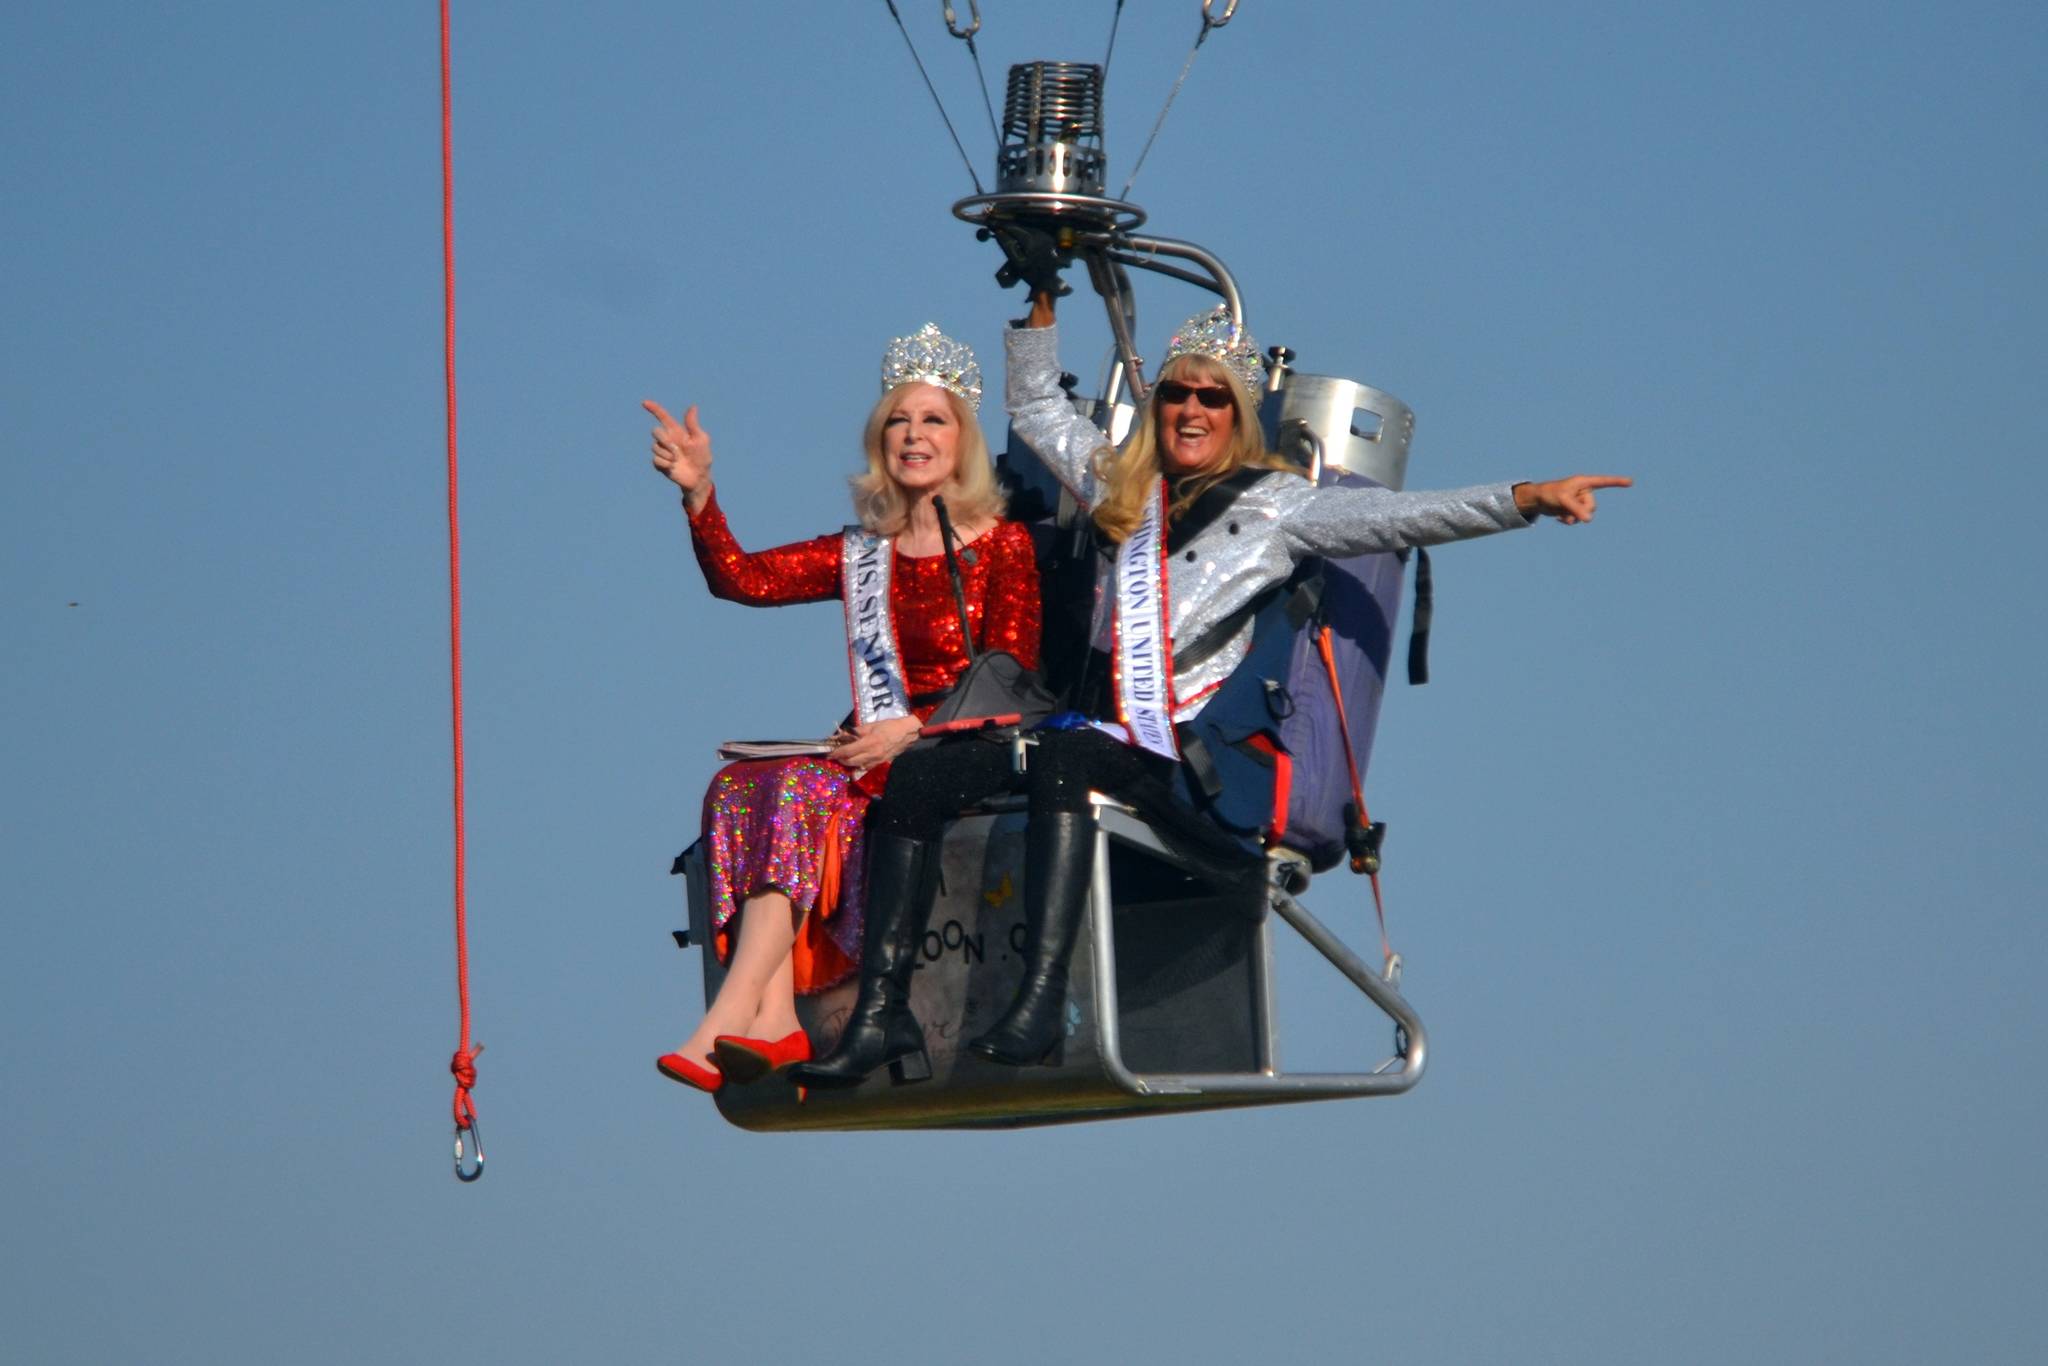 Cherie Kidd, Ms. Senior USA 2019-2020, left, and Captain-Crystal Stout, Ms. Senior Washington USA, film a promotional video from Stout’s Dream Catcher balloon for the Ms. Senior USA pageant in October. This was Kidd’s first time in a balloon on Sept. 9, and next month will be Stout’s first time competing in a pageant. Sequim Gazette photo by Matthew Nash